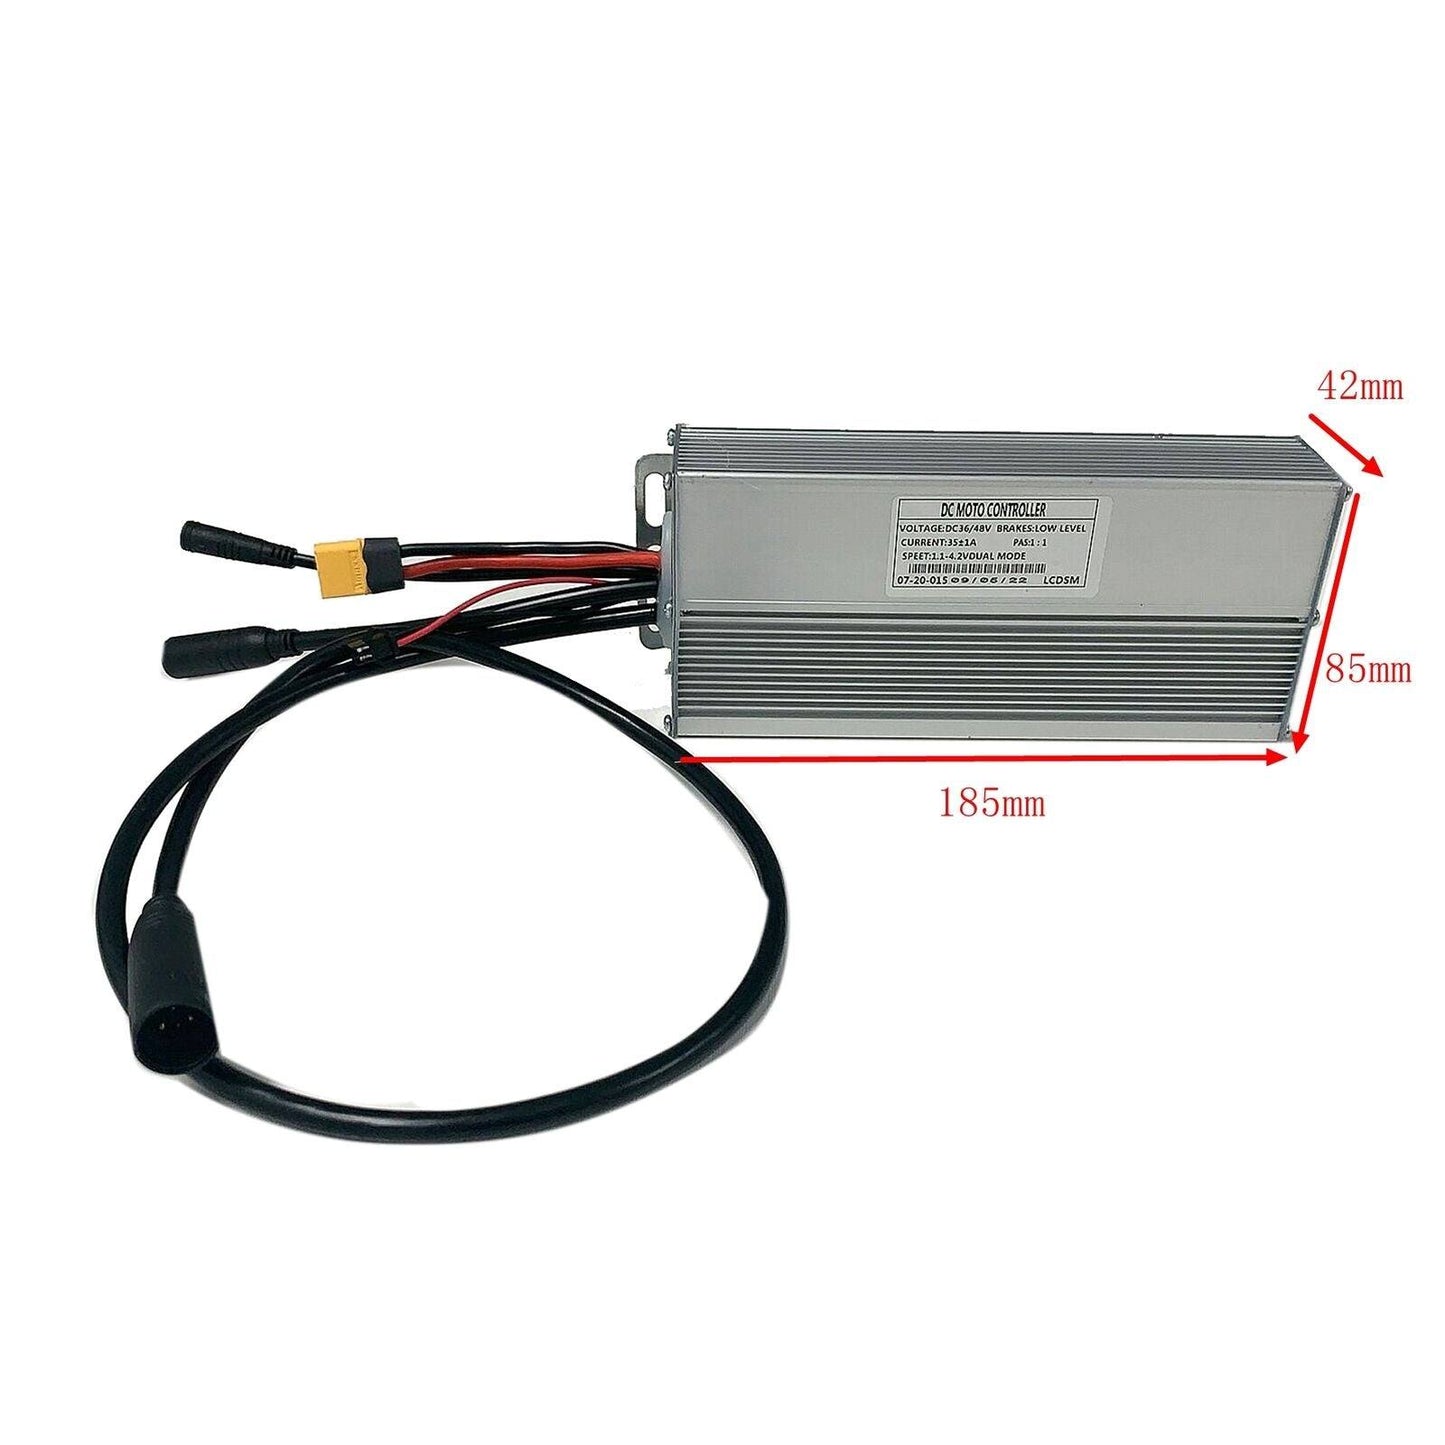 48V 35A eBike Controller for 1000w 1500w Electric Bicycle with Brushless Motor - TDRMOTO